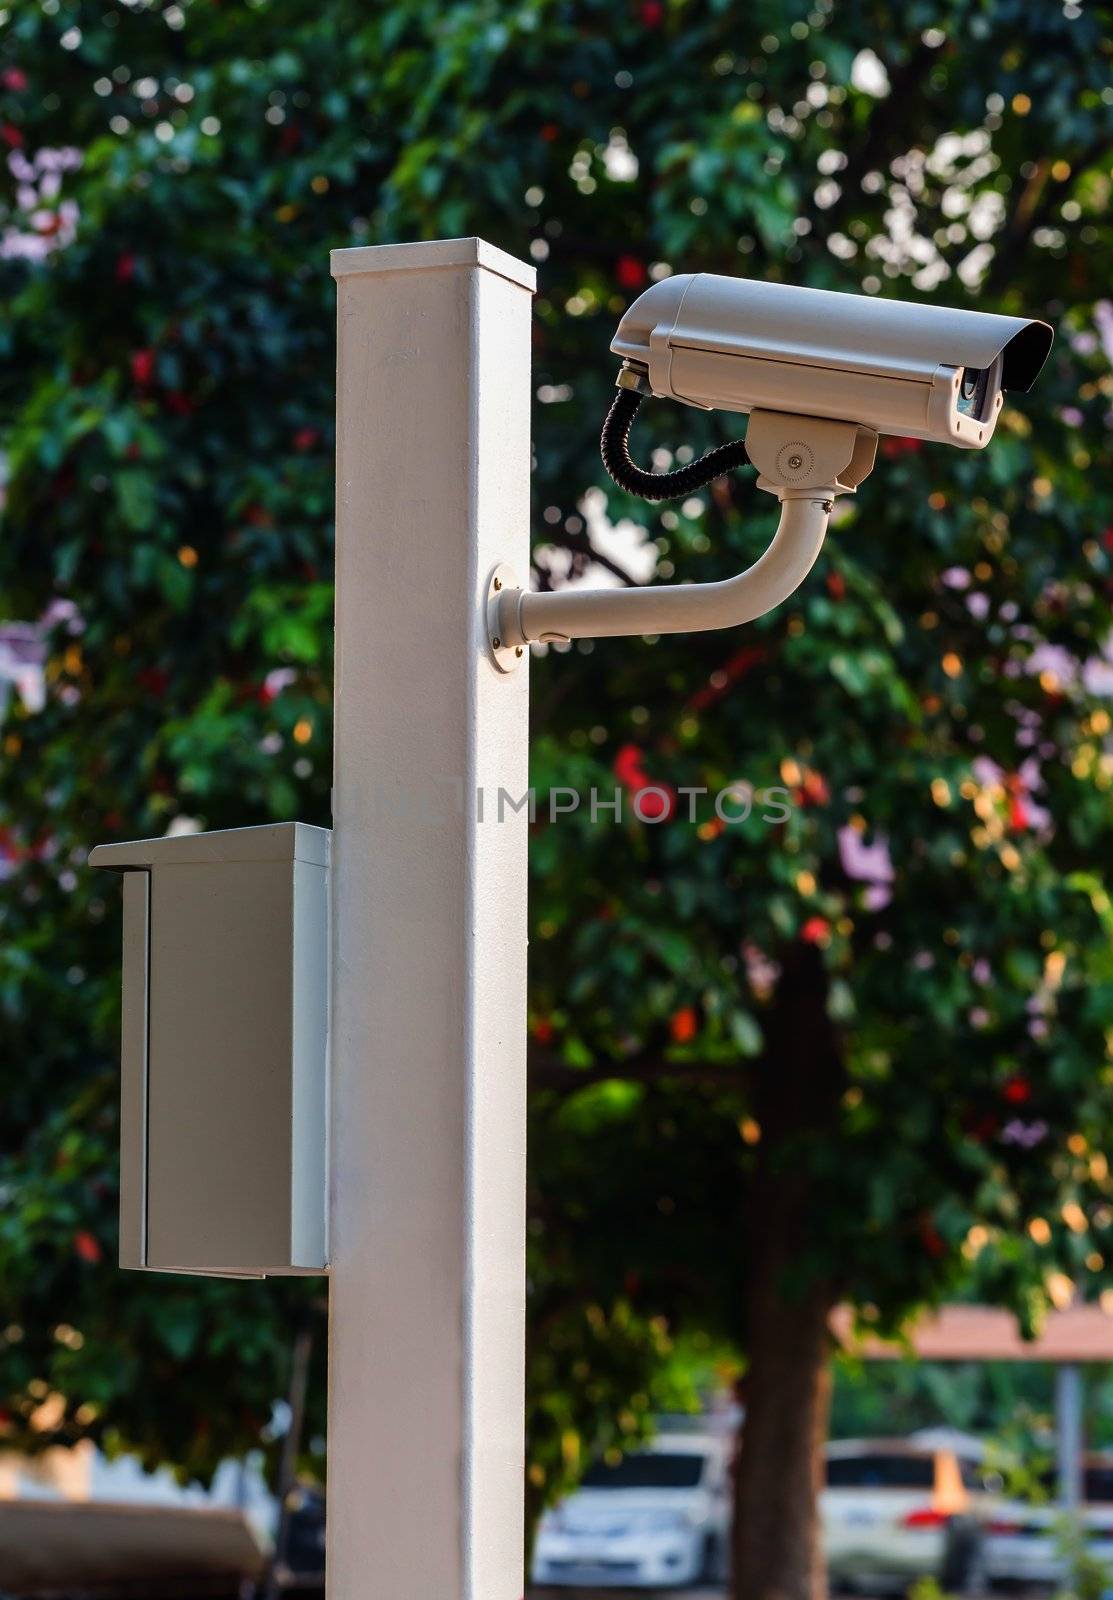 White CCTV camera watching for security 24 hours